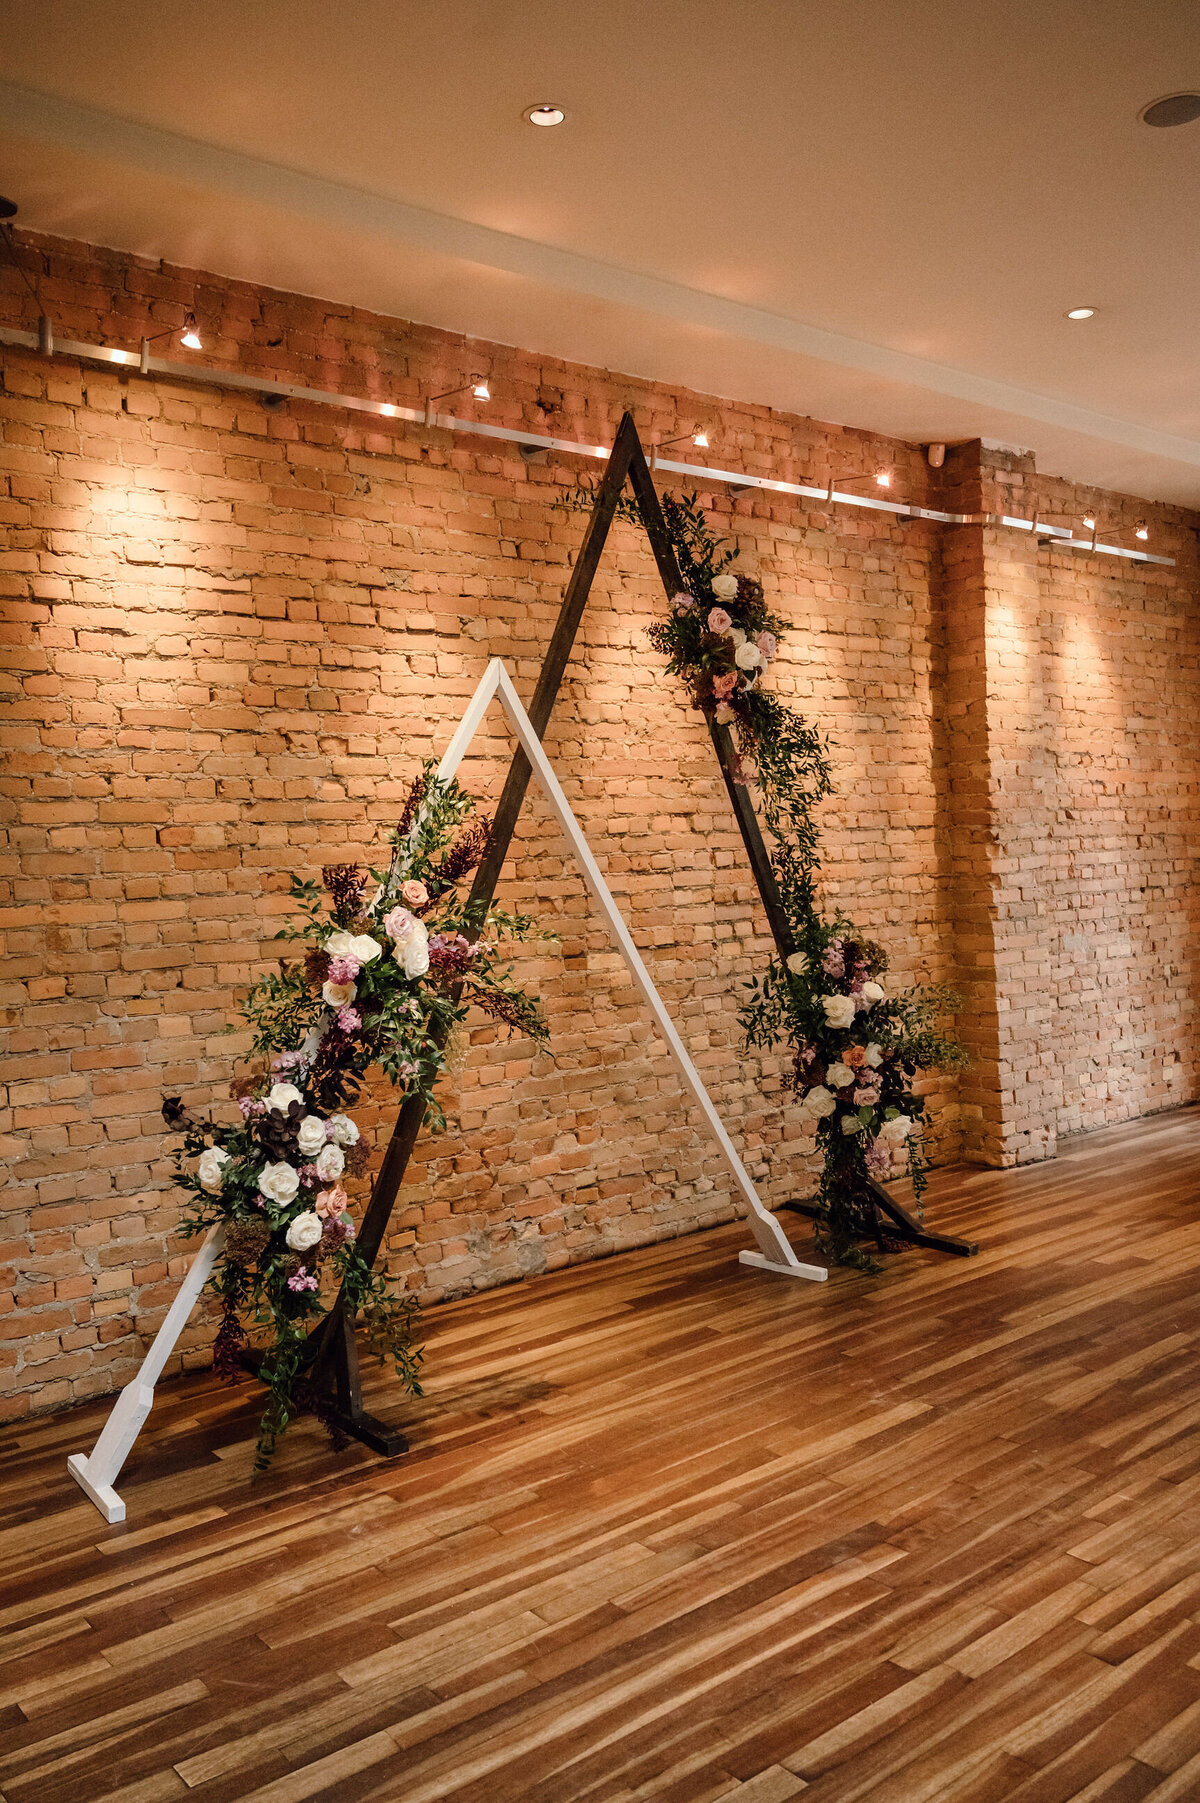 Indoor wedding ceremony with triangle arches and stunning white and burgundy florals at The Garret, historical and sophisticated, Calgary, Alberta wedding venue, featured on the Brontë Bride Vendor Guide.